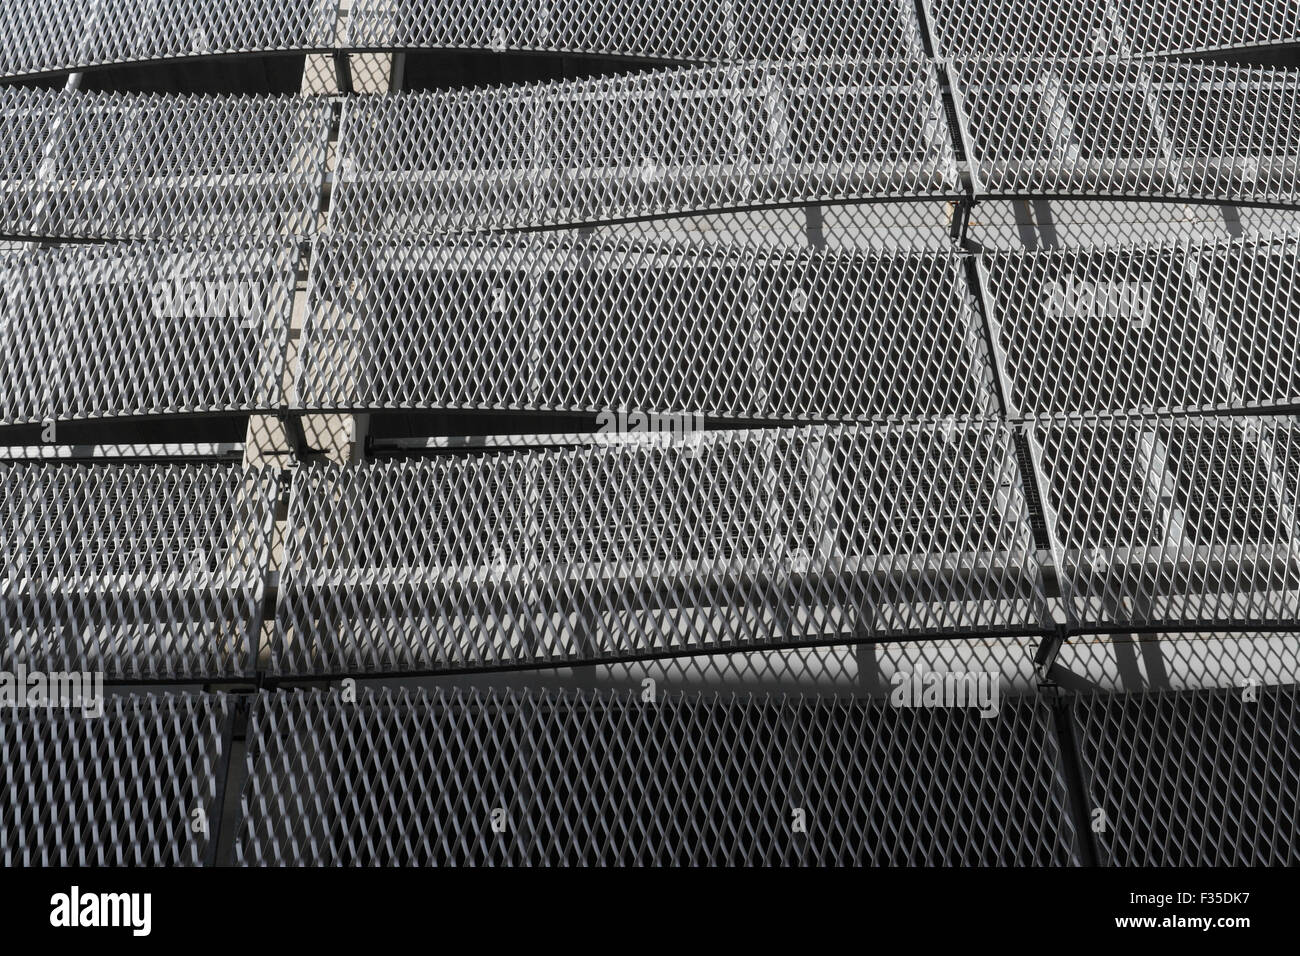 Exterior curved metal mesh on outside of car park building, Sheffield England Stock Photo